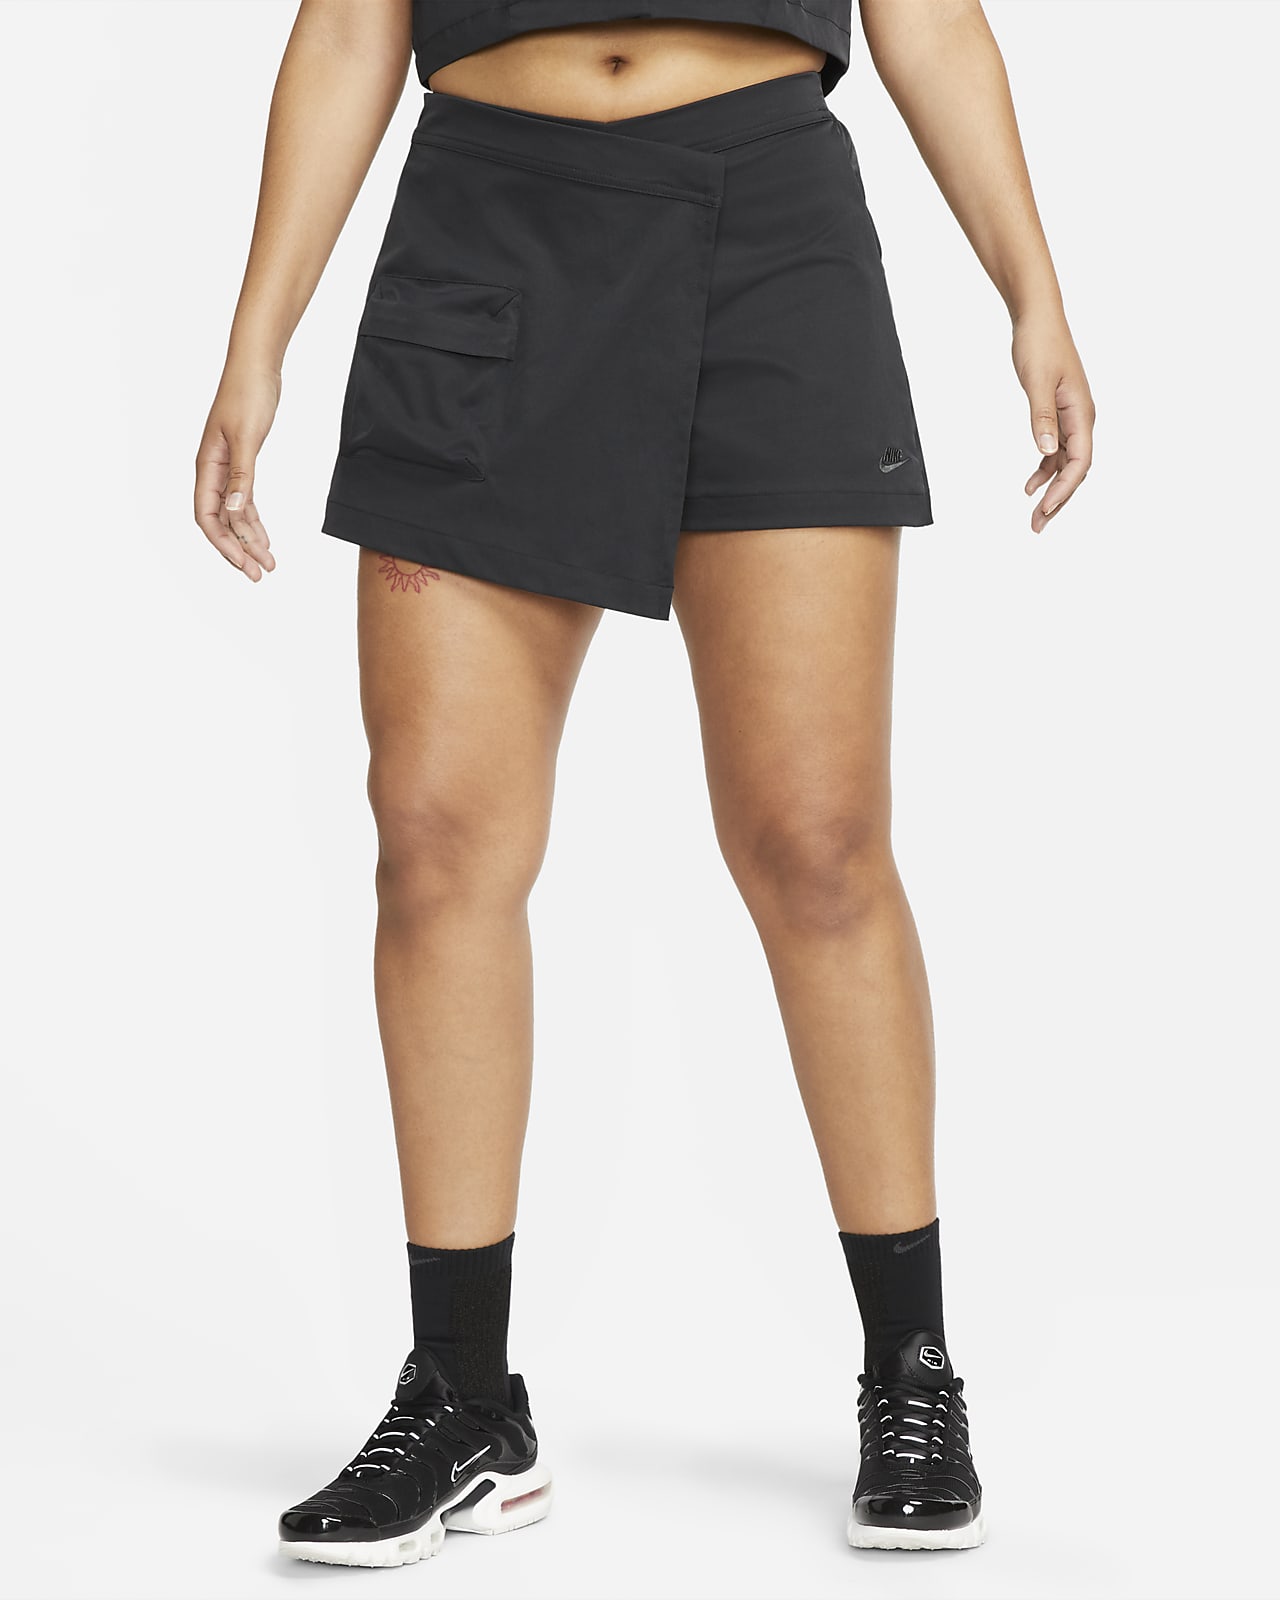 Women's Skorts with Pockets: Pacific Performance Pull-On